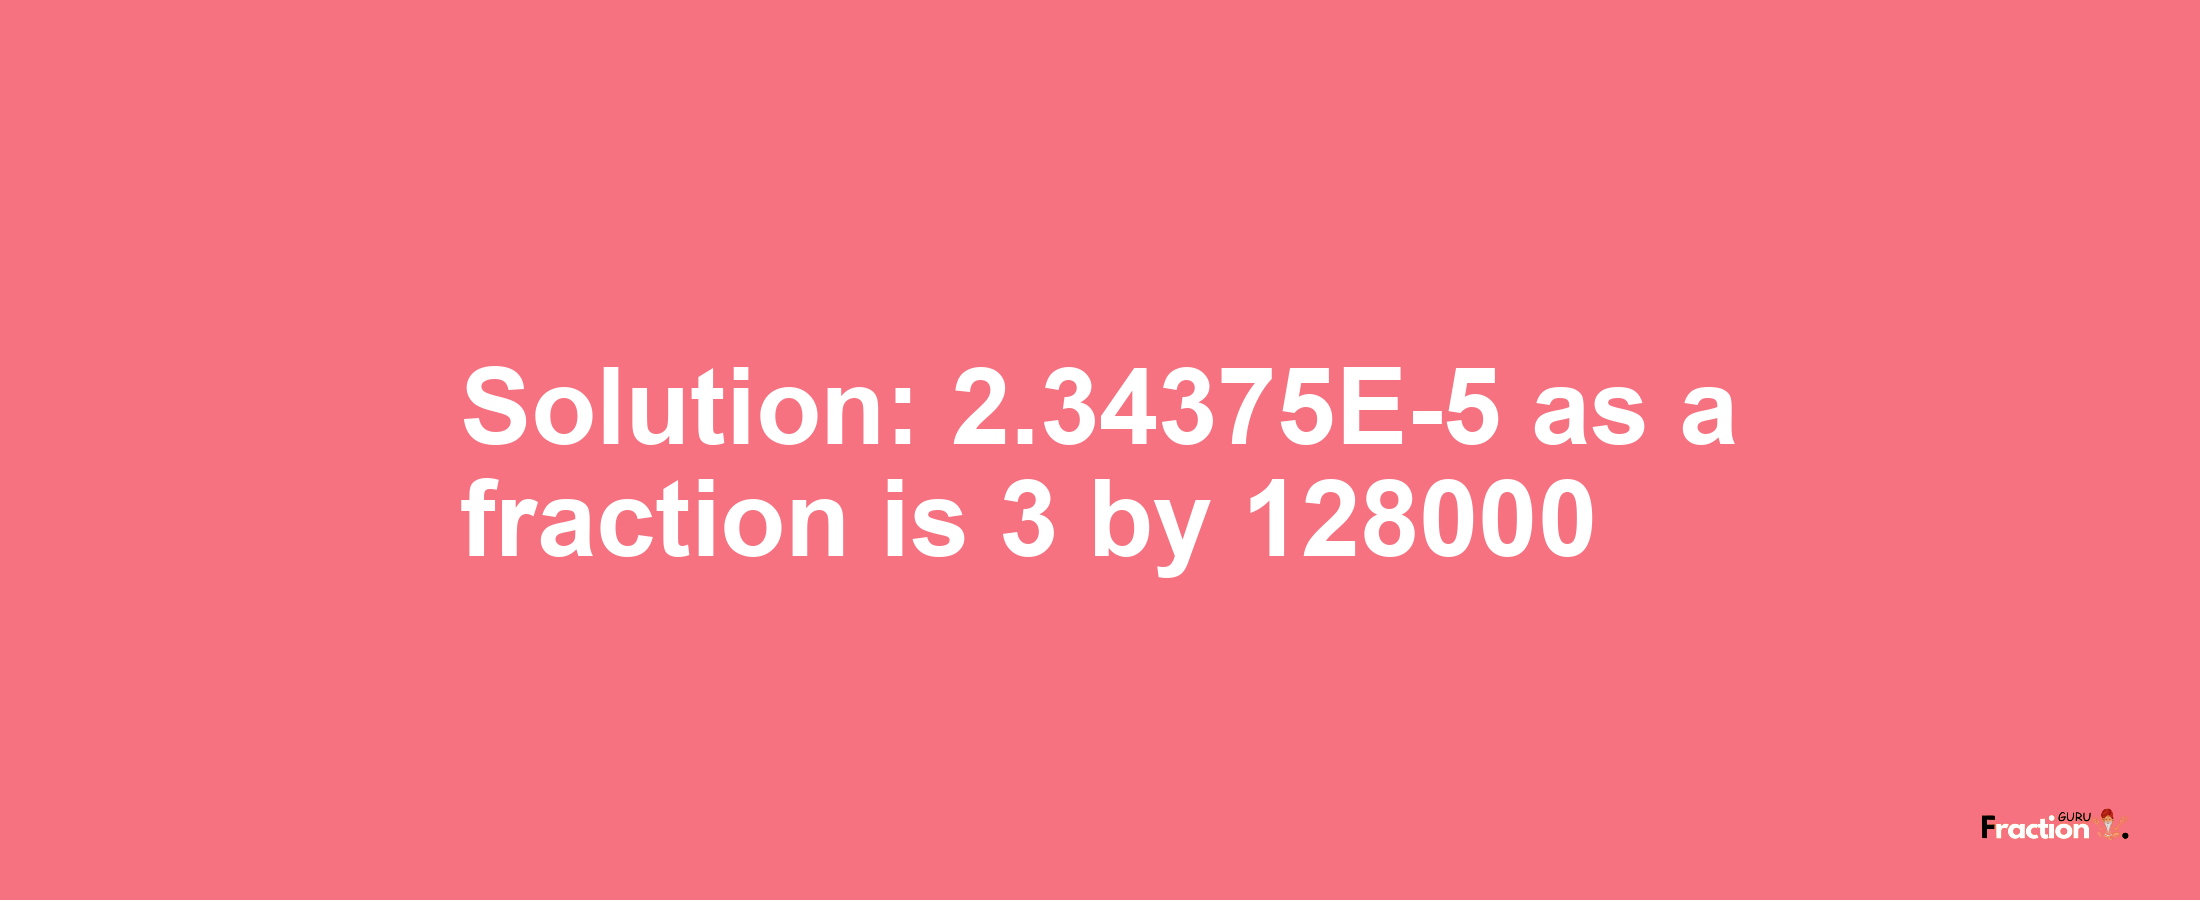 Solution:2.34375E-5 as a fraction is 3/128000